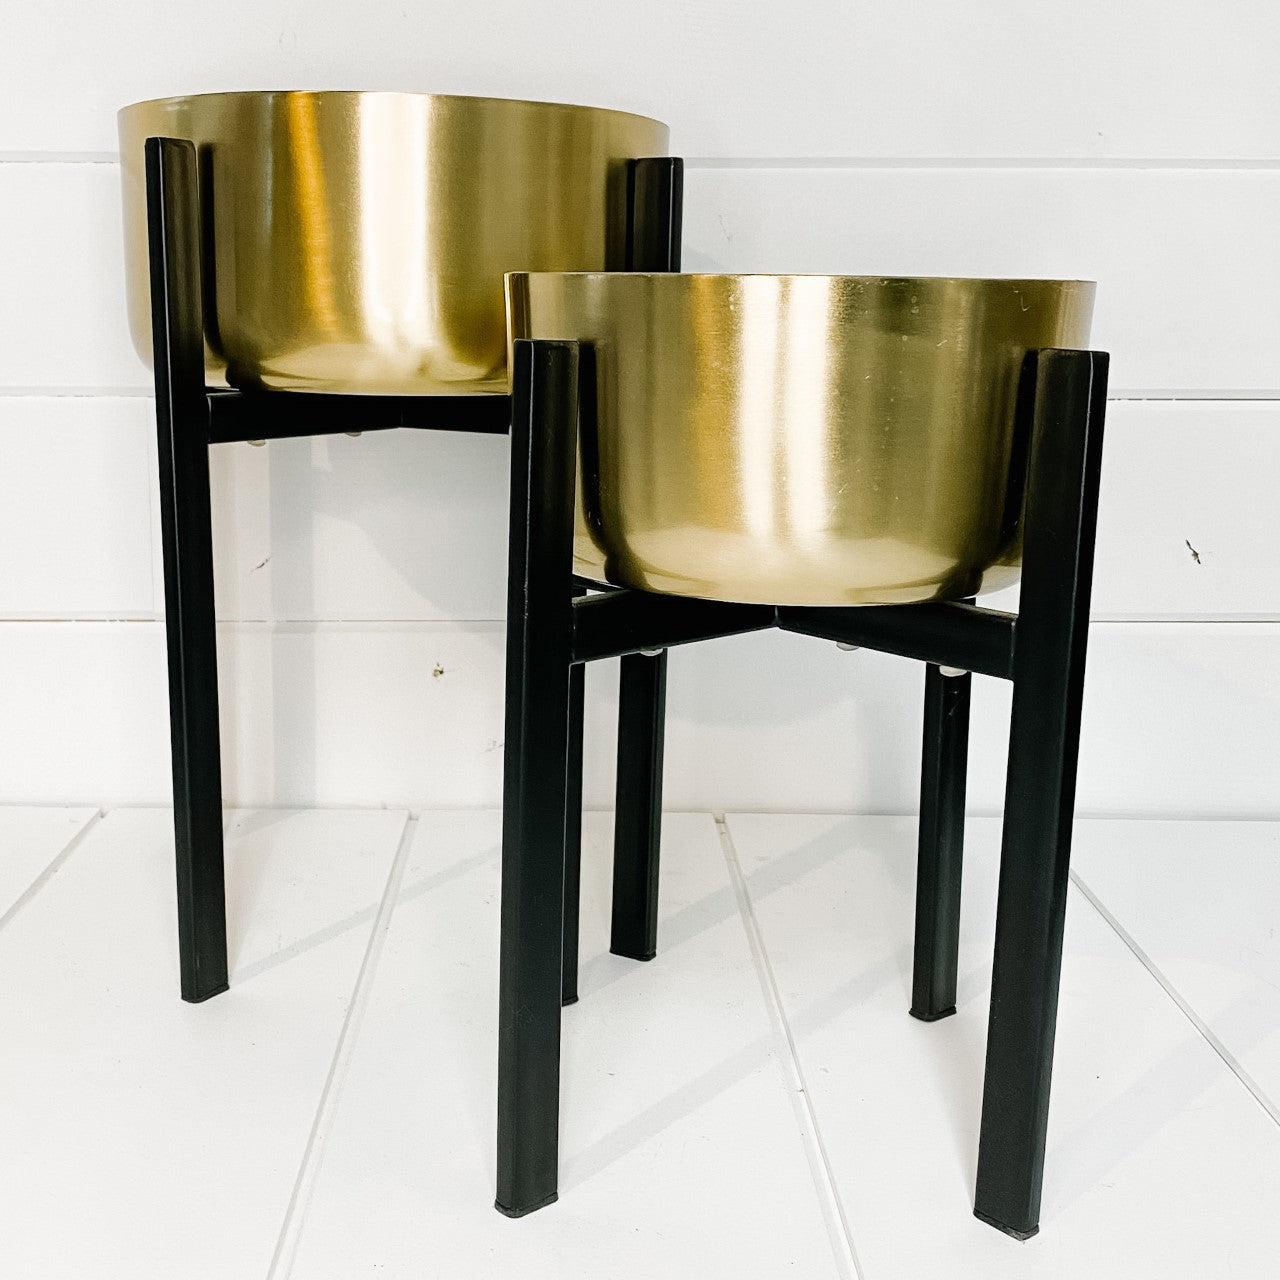 Gold metal planter with stand - two sizes